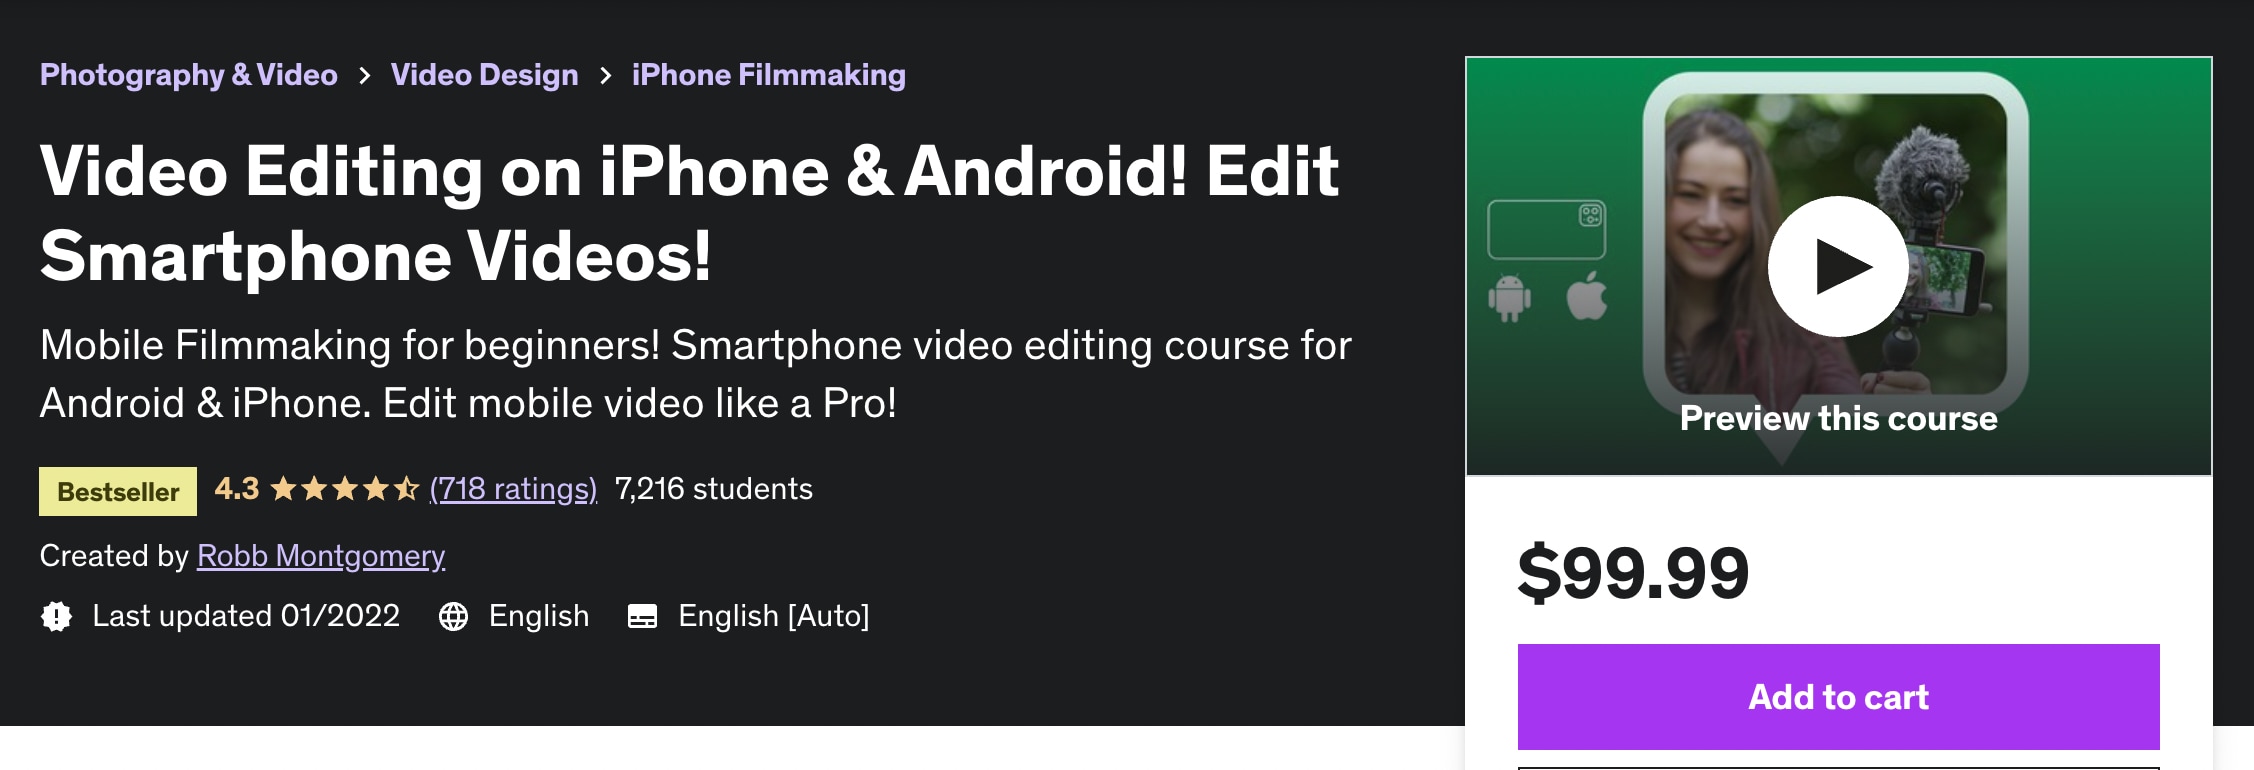 video editing course for mobile